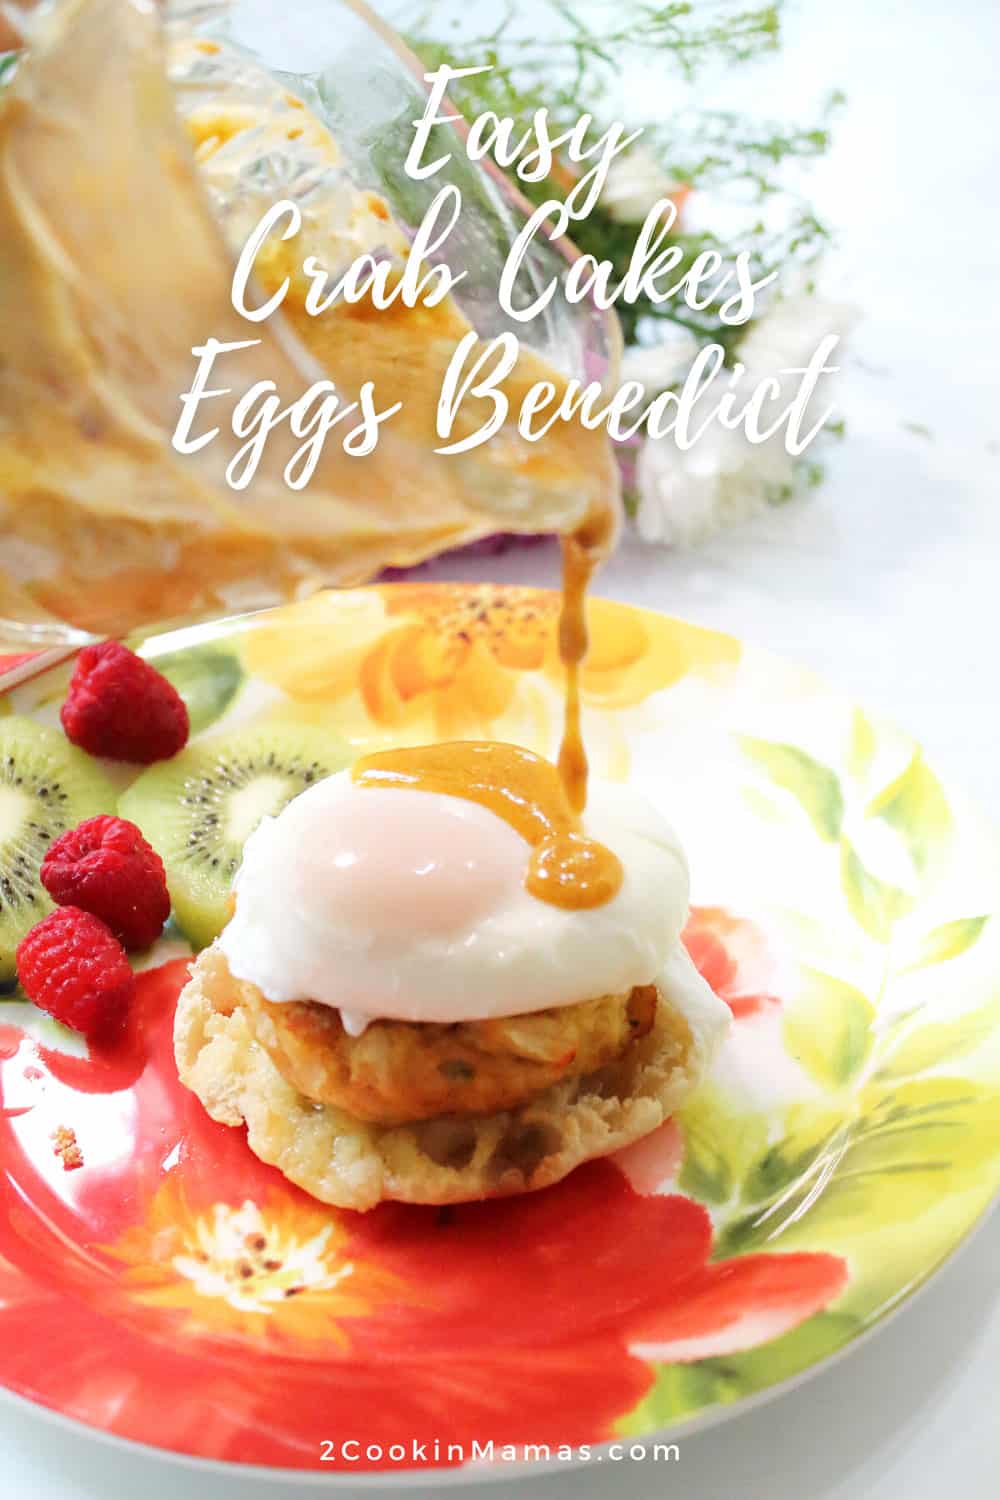 Crab Cakes Eggs Benedict with Easy Hollandaise Sauce